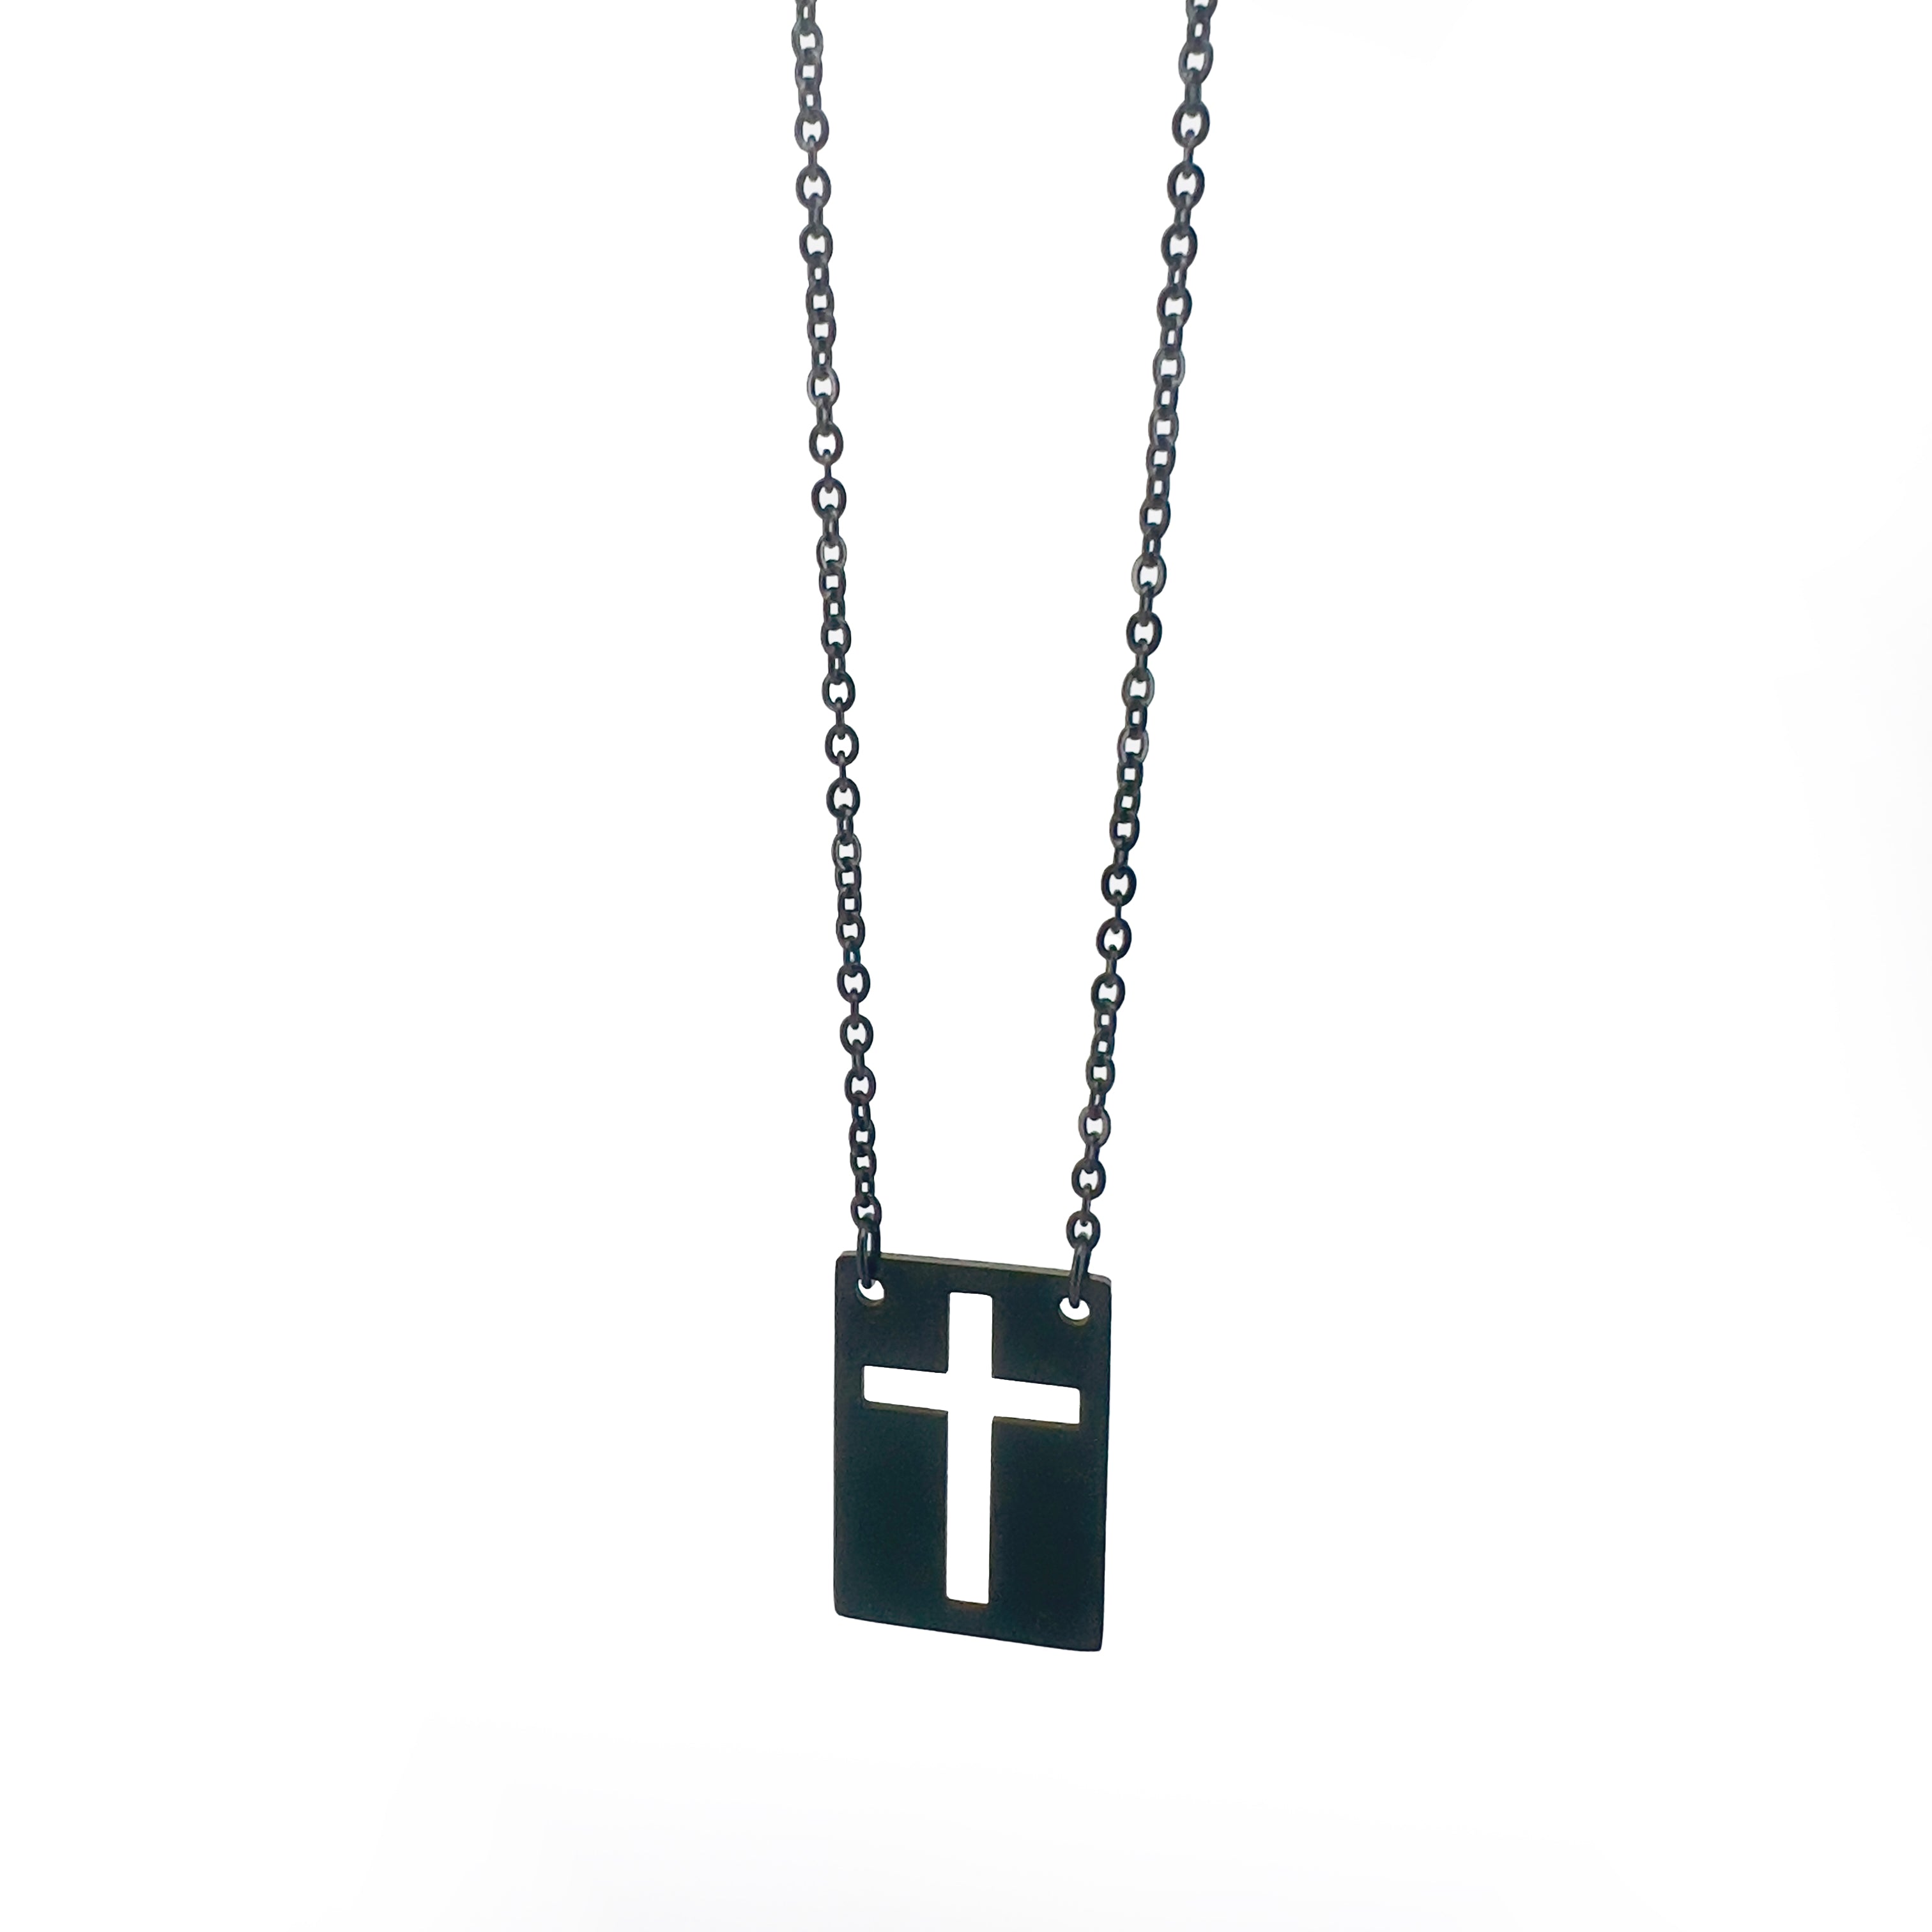 Octavio Stainless Steel Chain Necklace with Symbolic Pendant